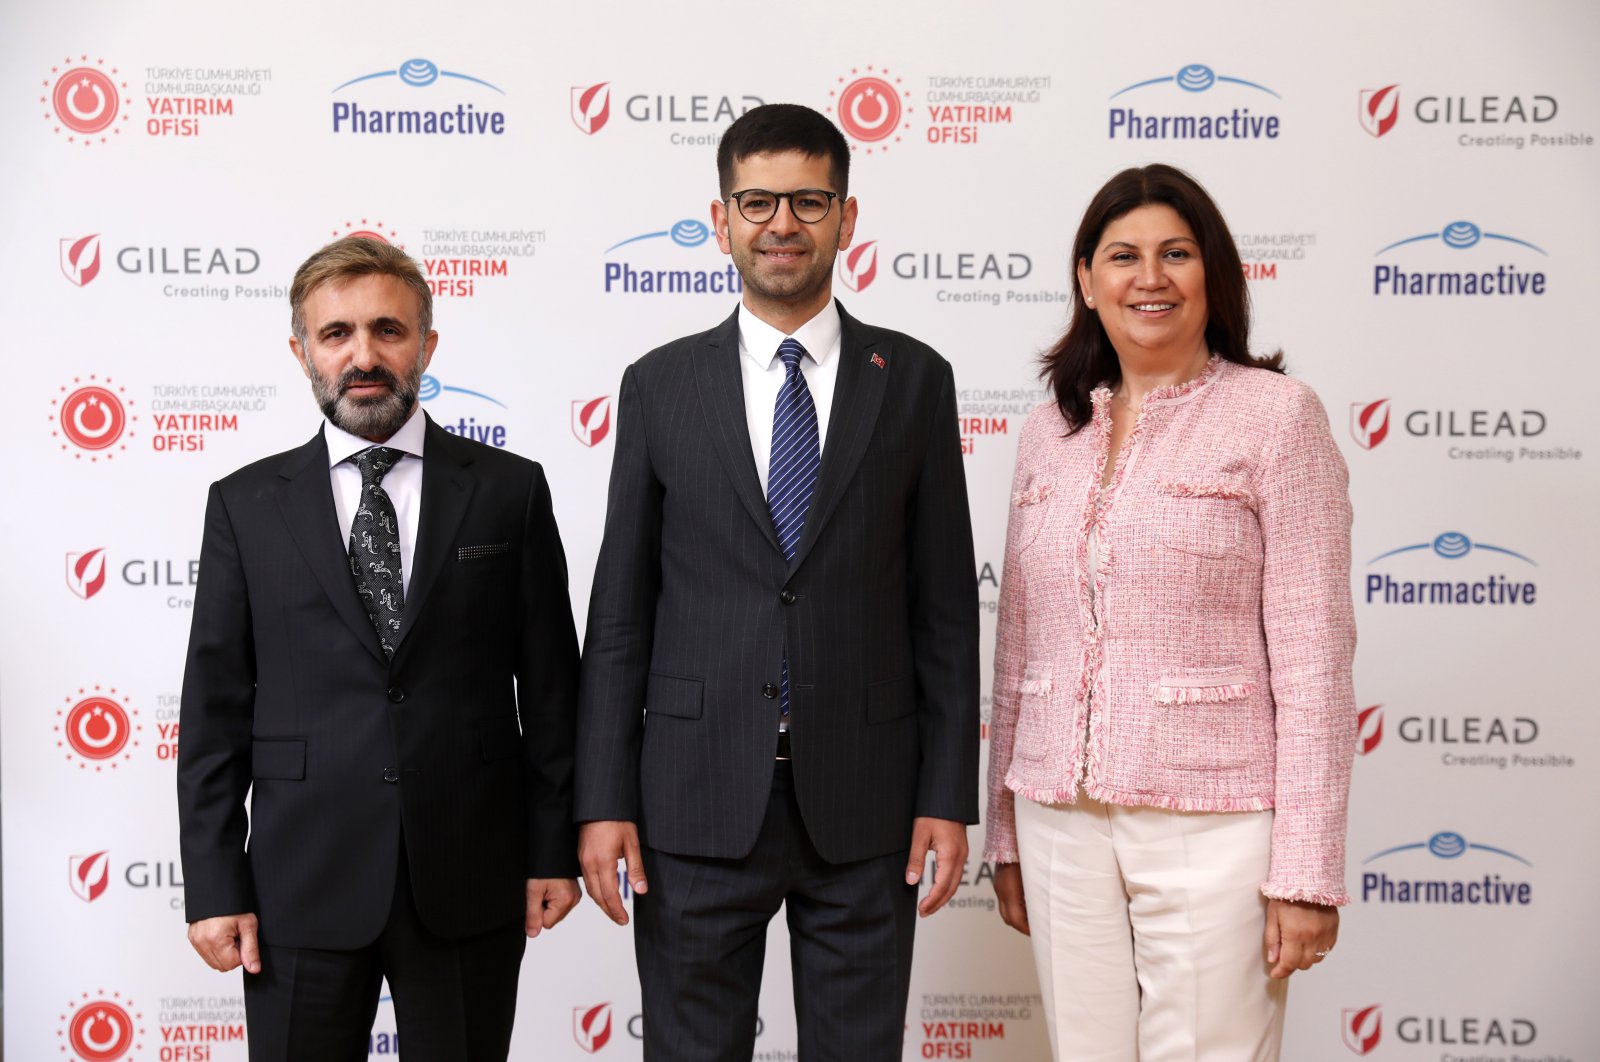 Chairperson of the Pharmactive Board of Directors Haluk Sancak (L), head of the Investment Office Burak Dağlıoğlu (C) and General Manager of Gilead Sciences Turkey Şebnem Girgin pose after a press meeting held in Istanbul, Turkey. (Courtesy of Investment Office)